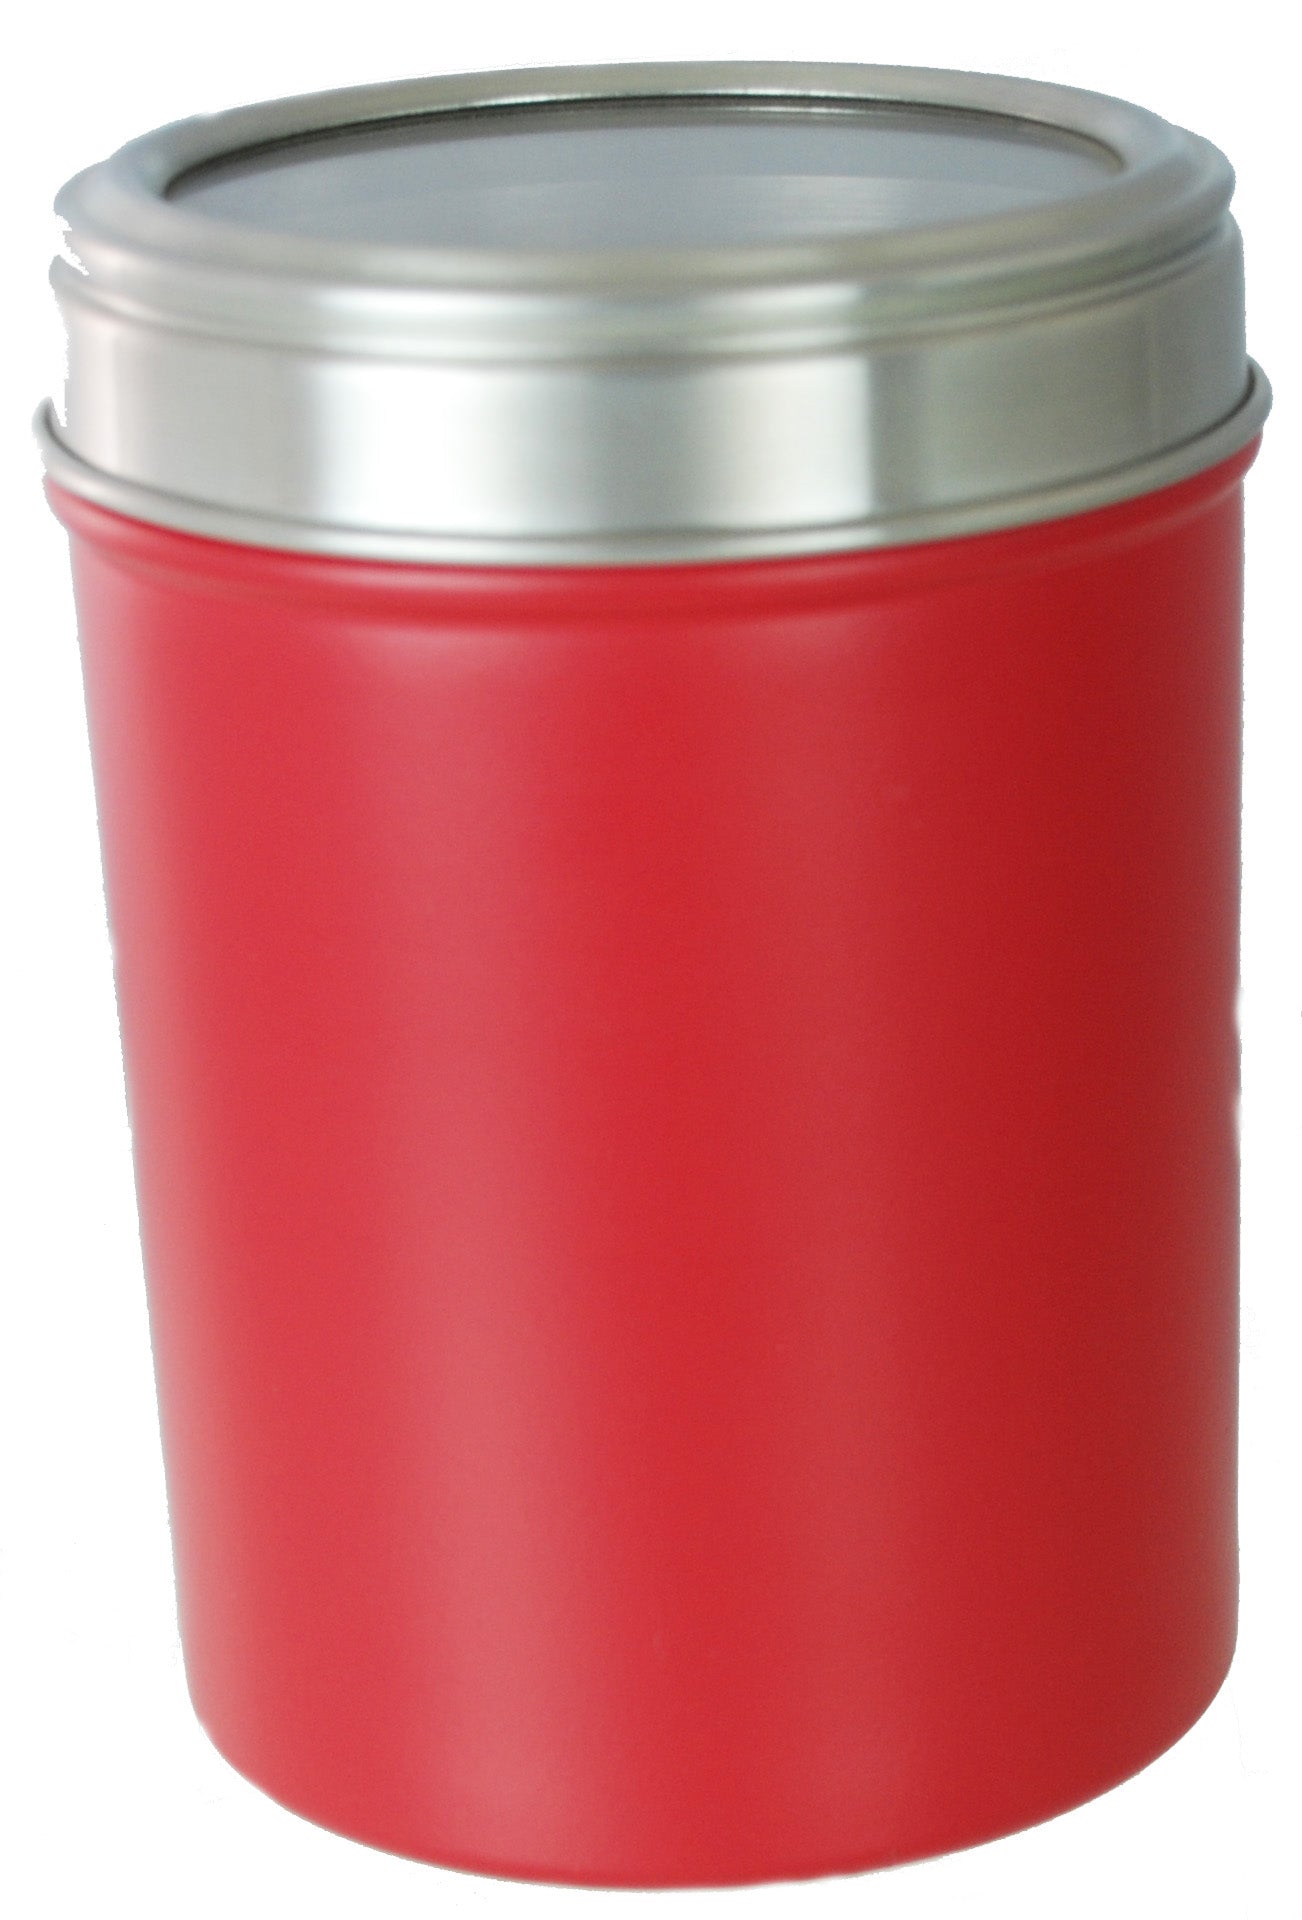 Buckingham Stainless Steel Storage Canisters with Cut-Out Acrylic Lid, 14 cm Red